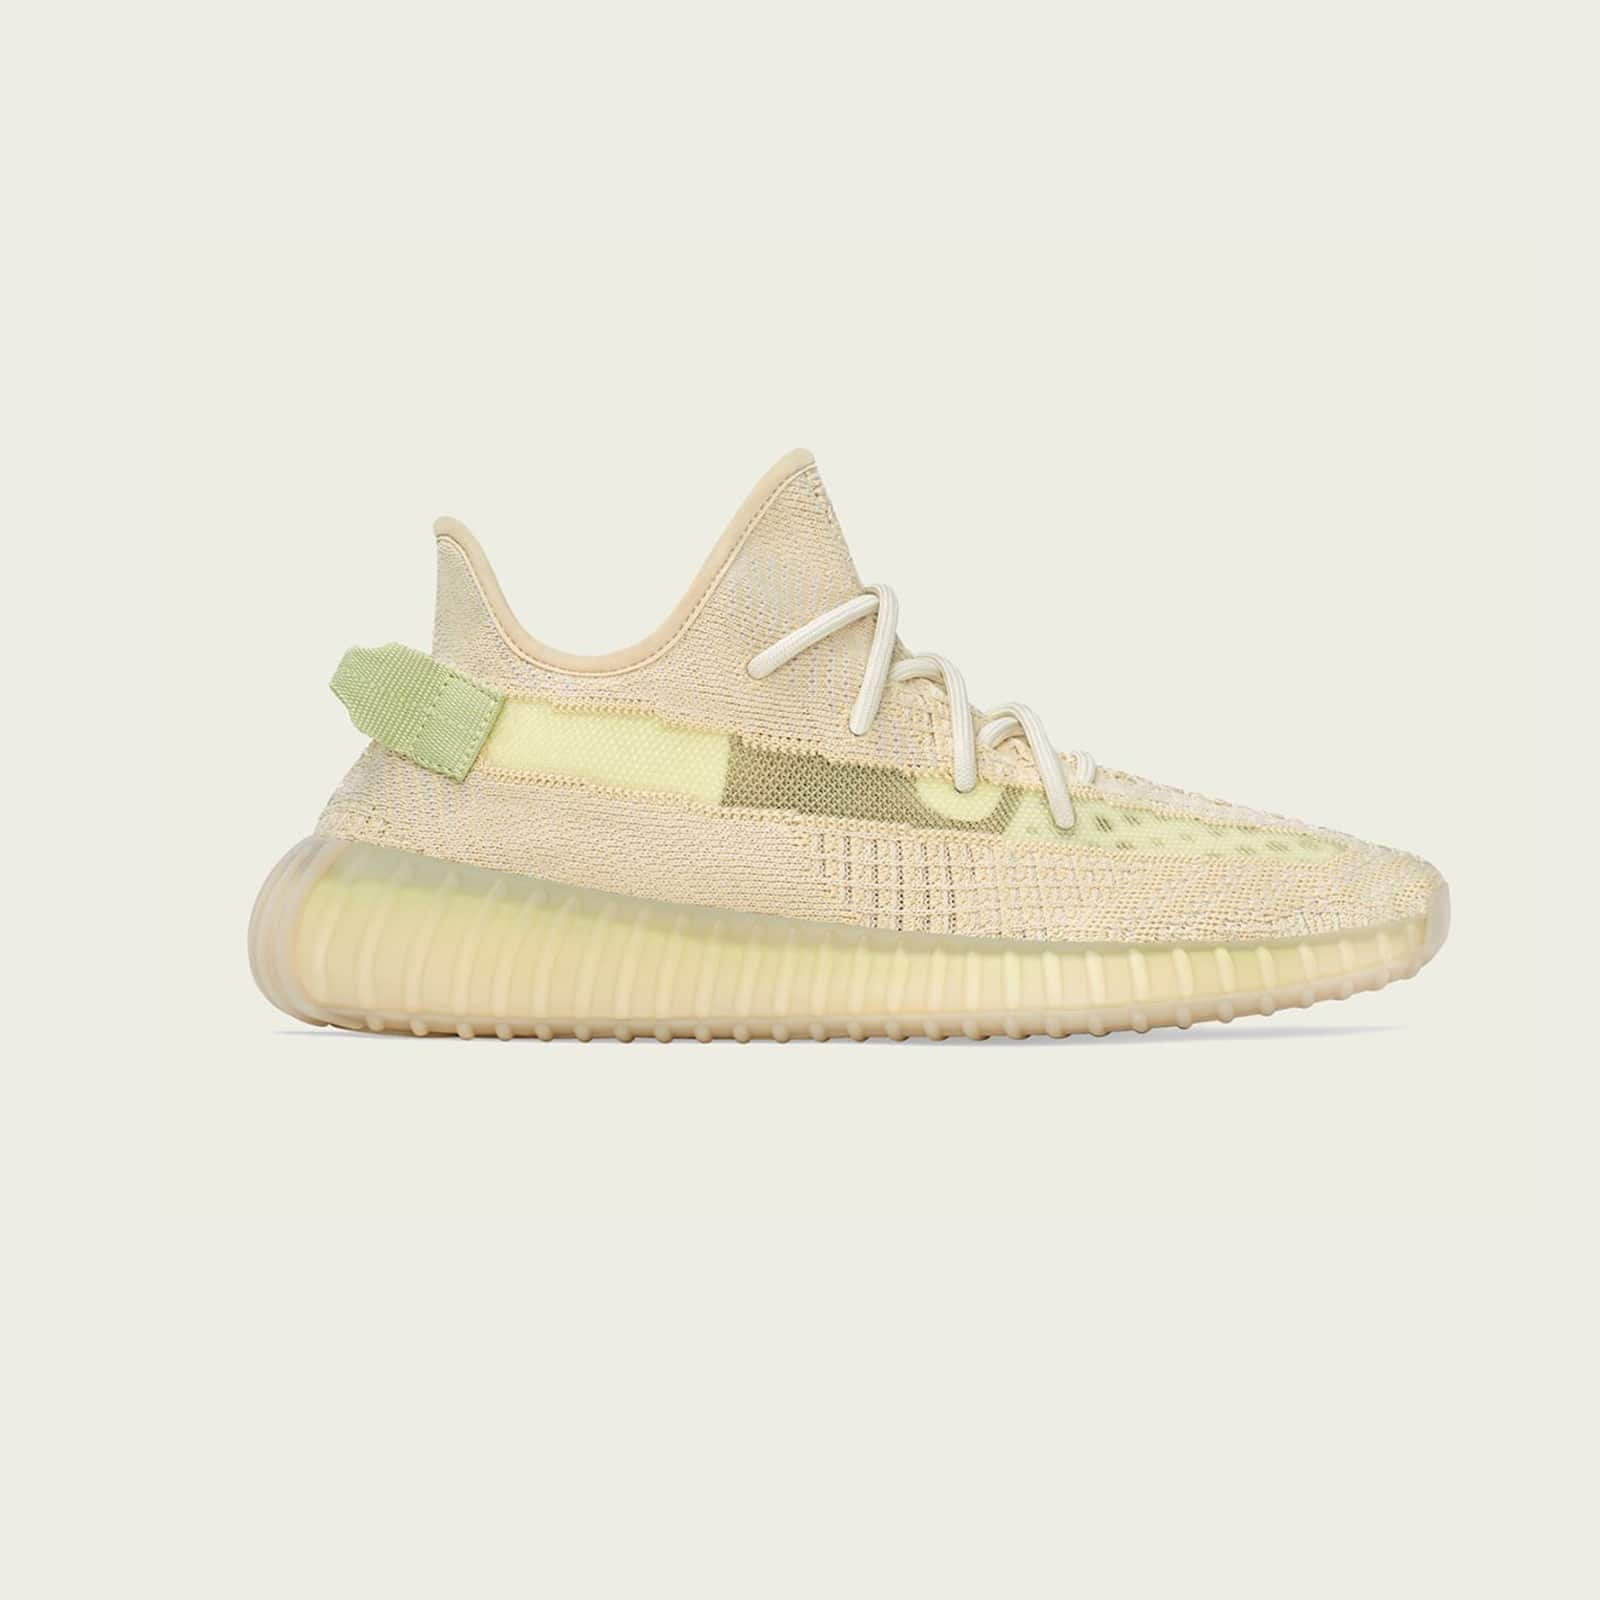 yeezy supply asia discounts and more